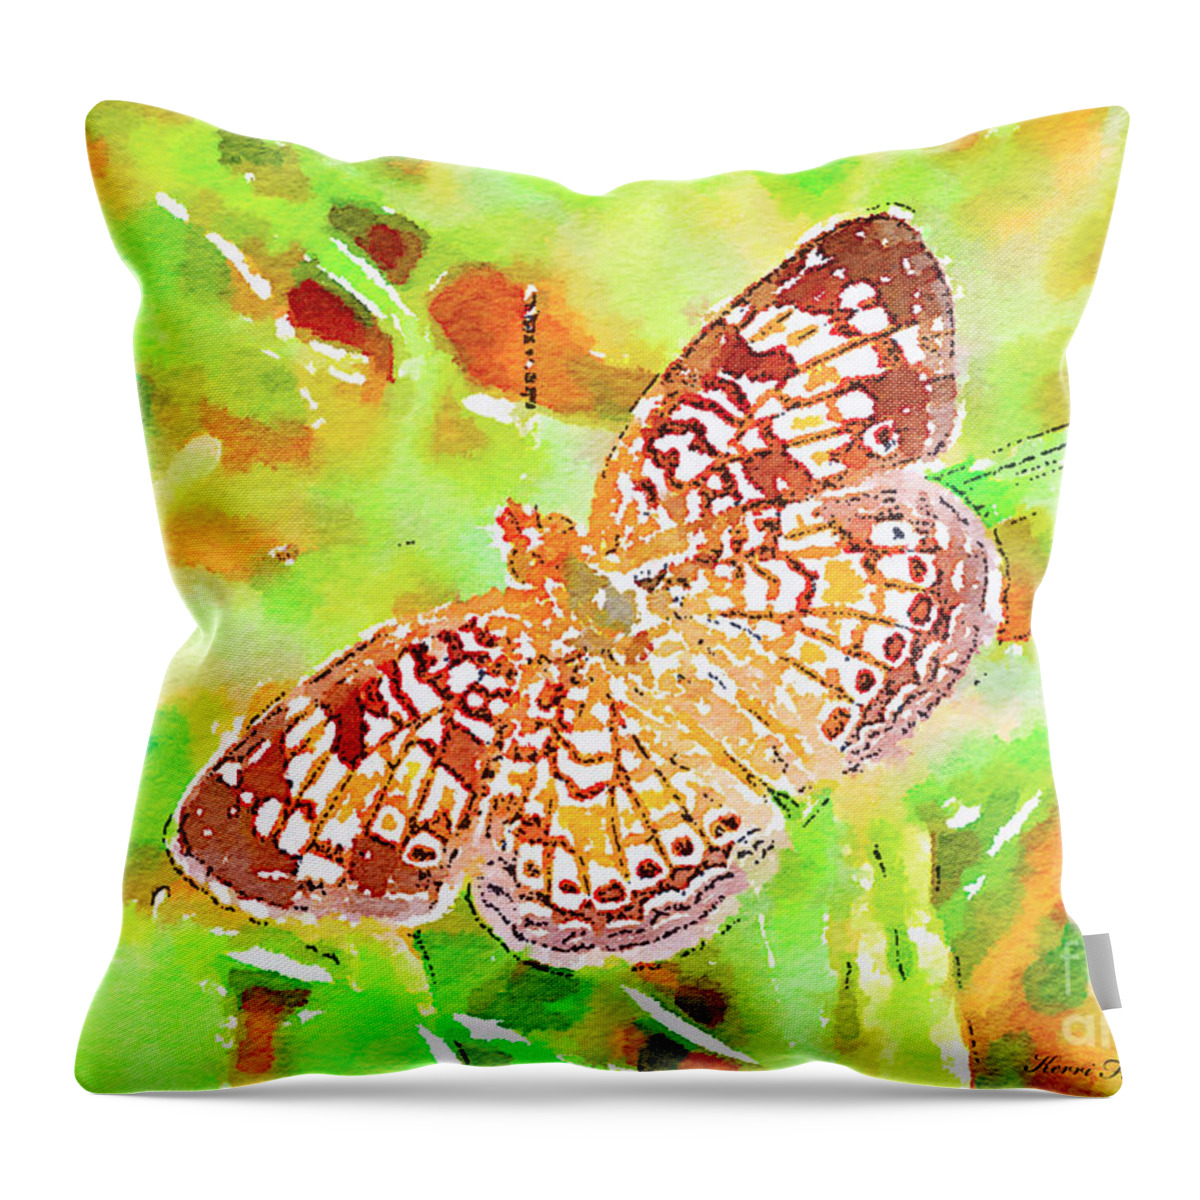 Digital Watercolor Throw Pillow featuring the photograph Orange Butterfly - Digital Watercolor by Kerri Farley